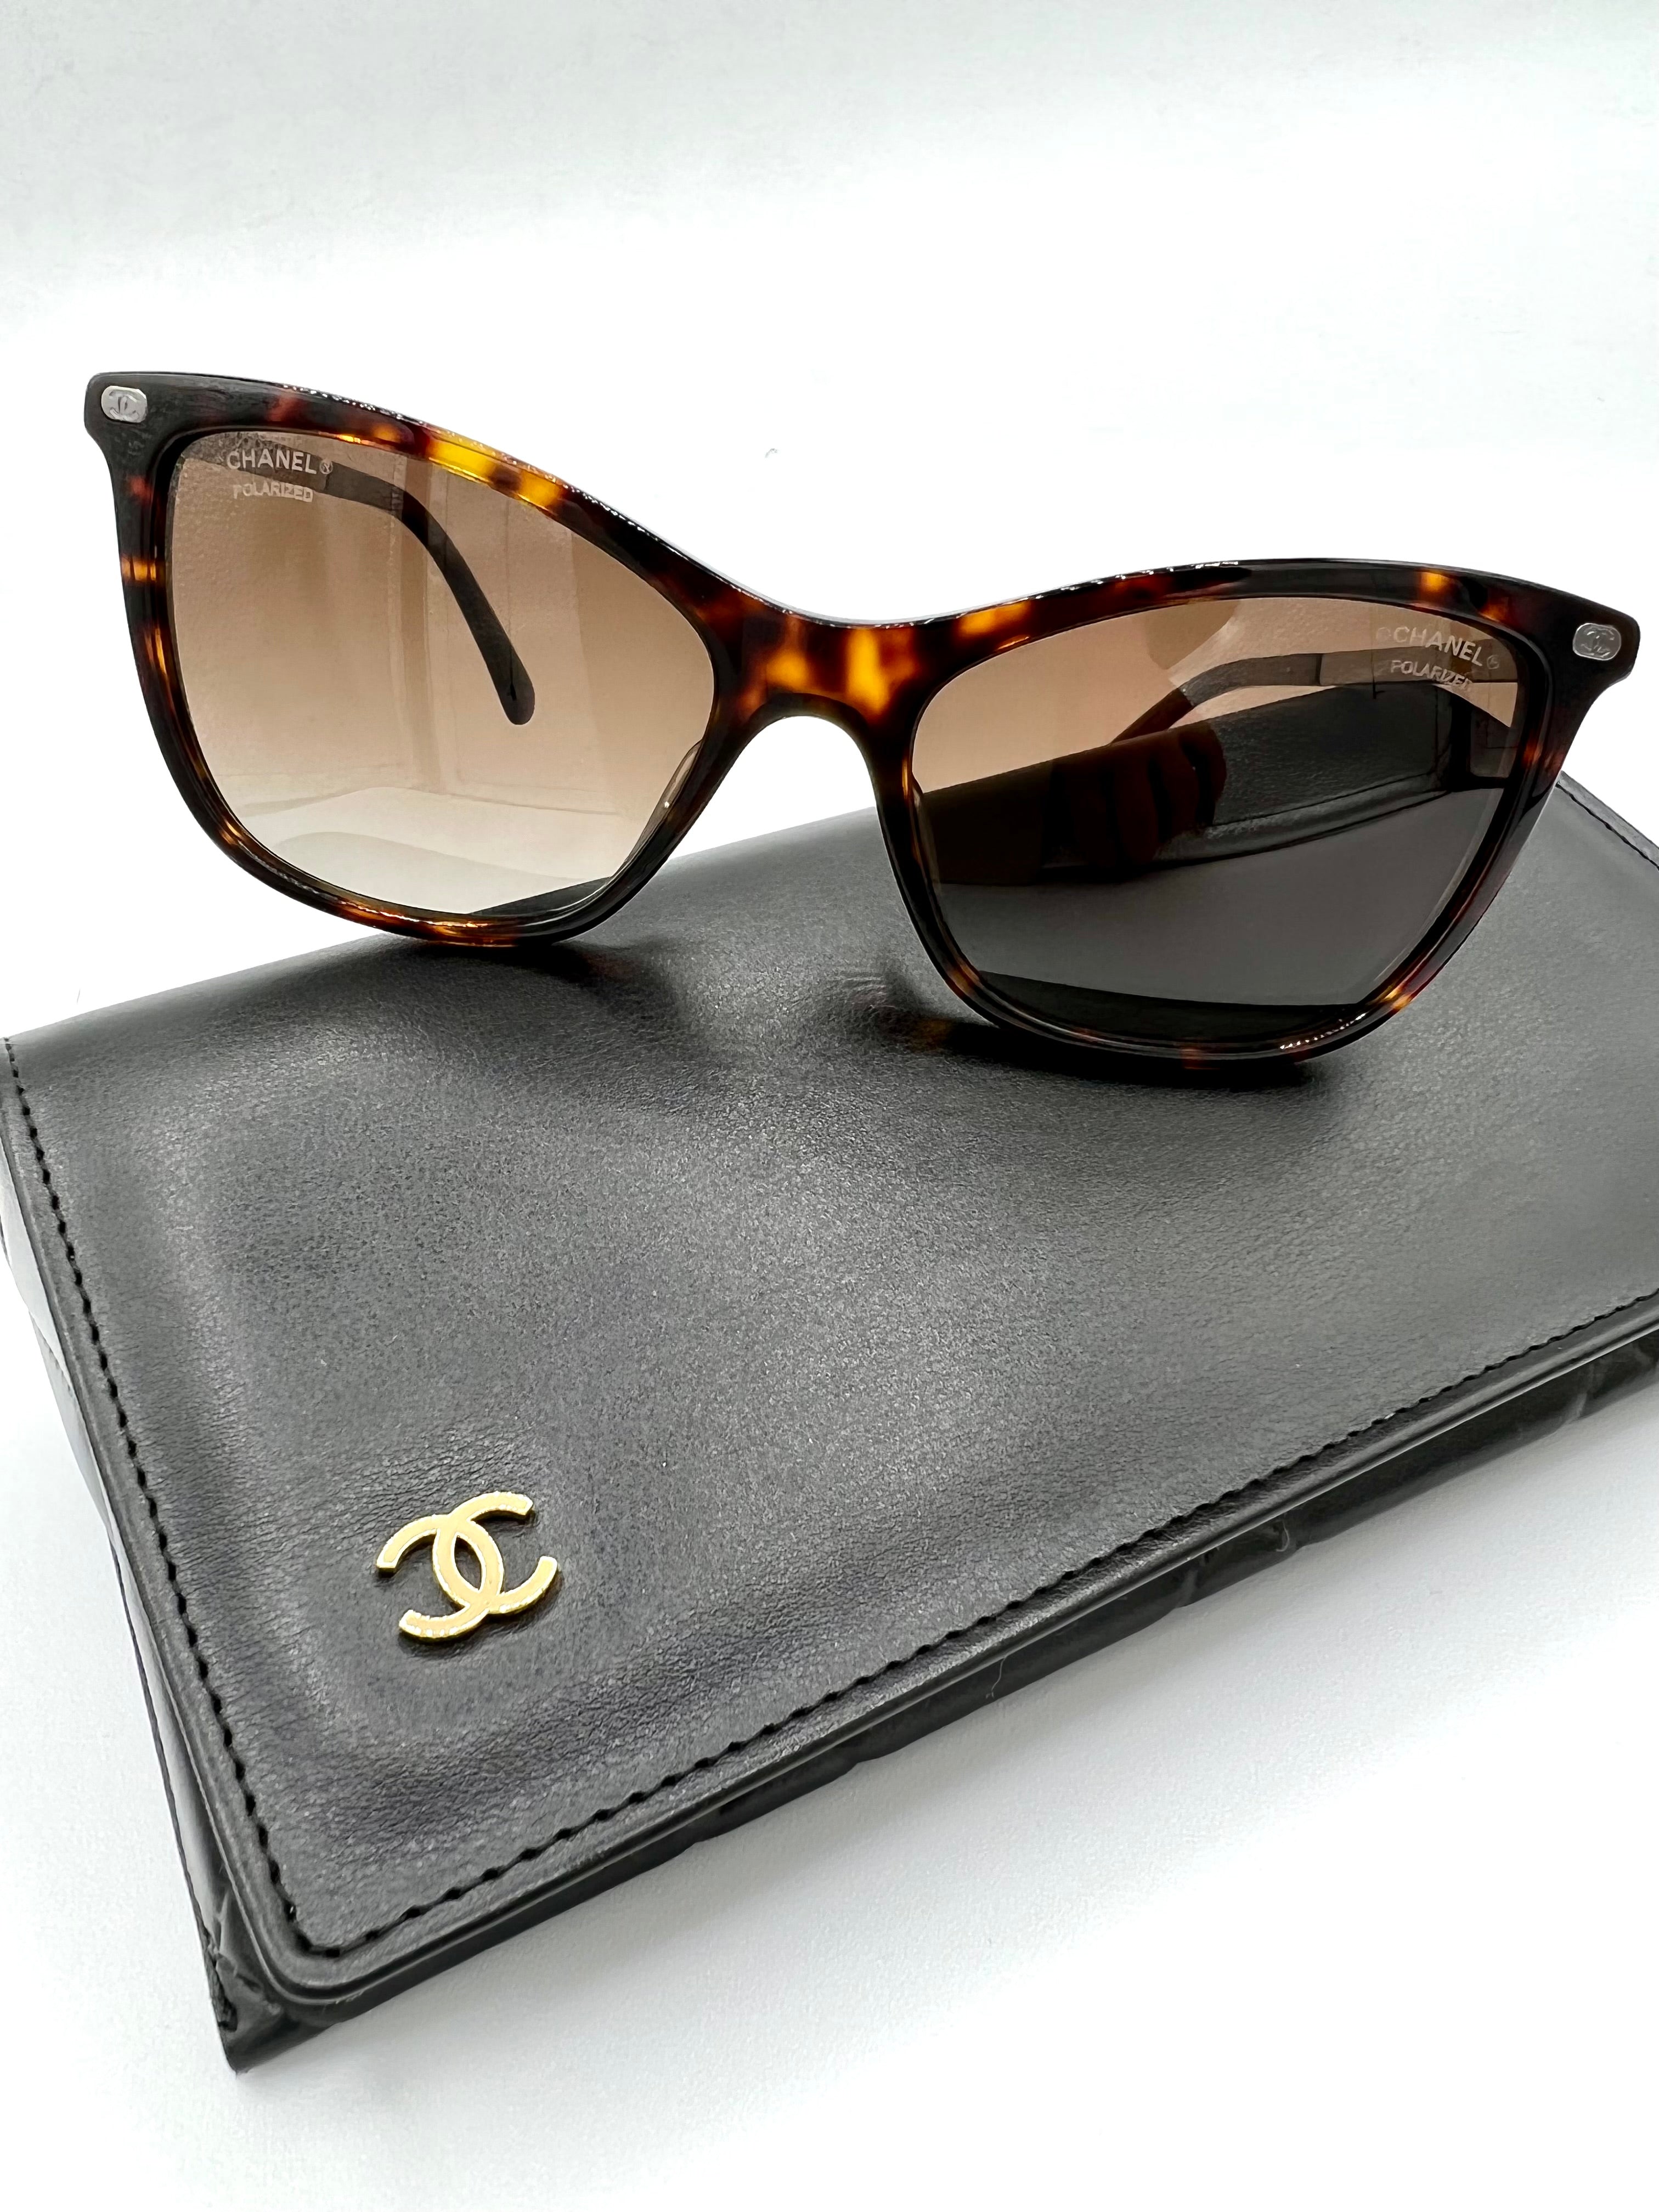 The Chanel Sunglasses Collection – Classic Coco Authentic Vintage Luxury